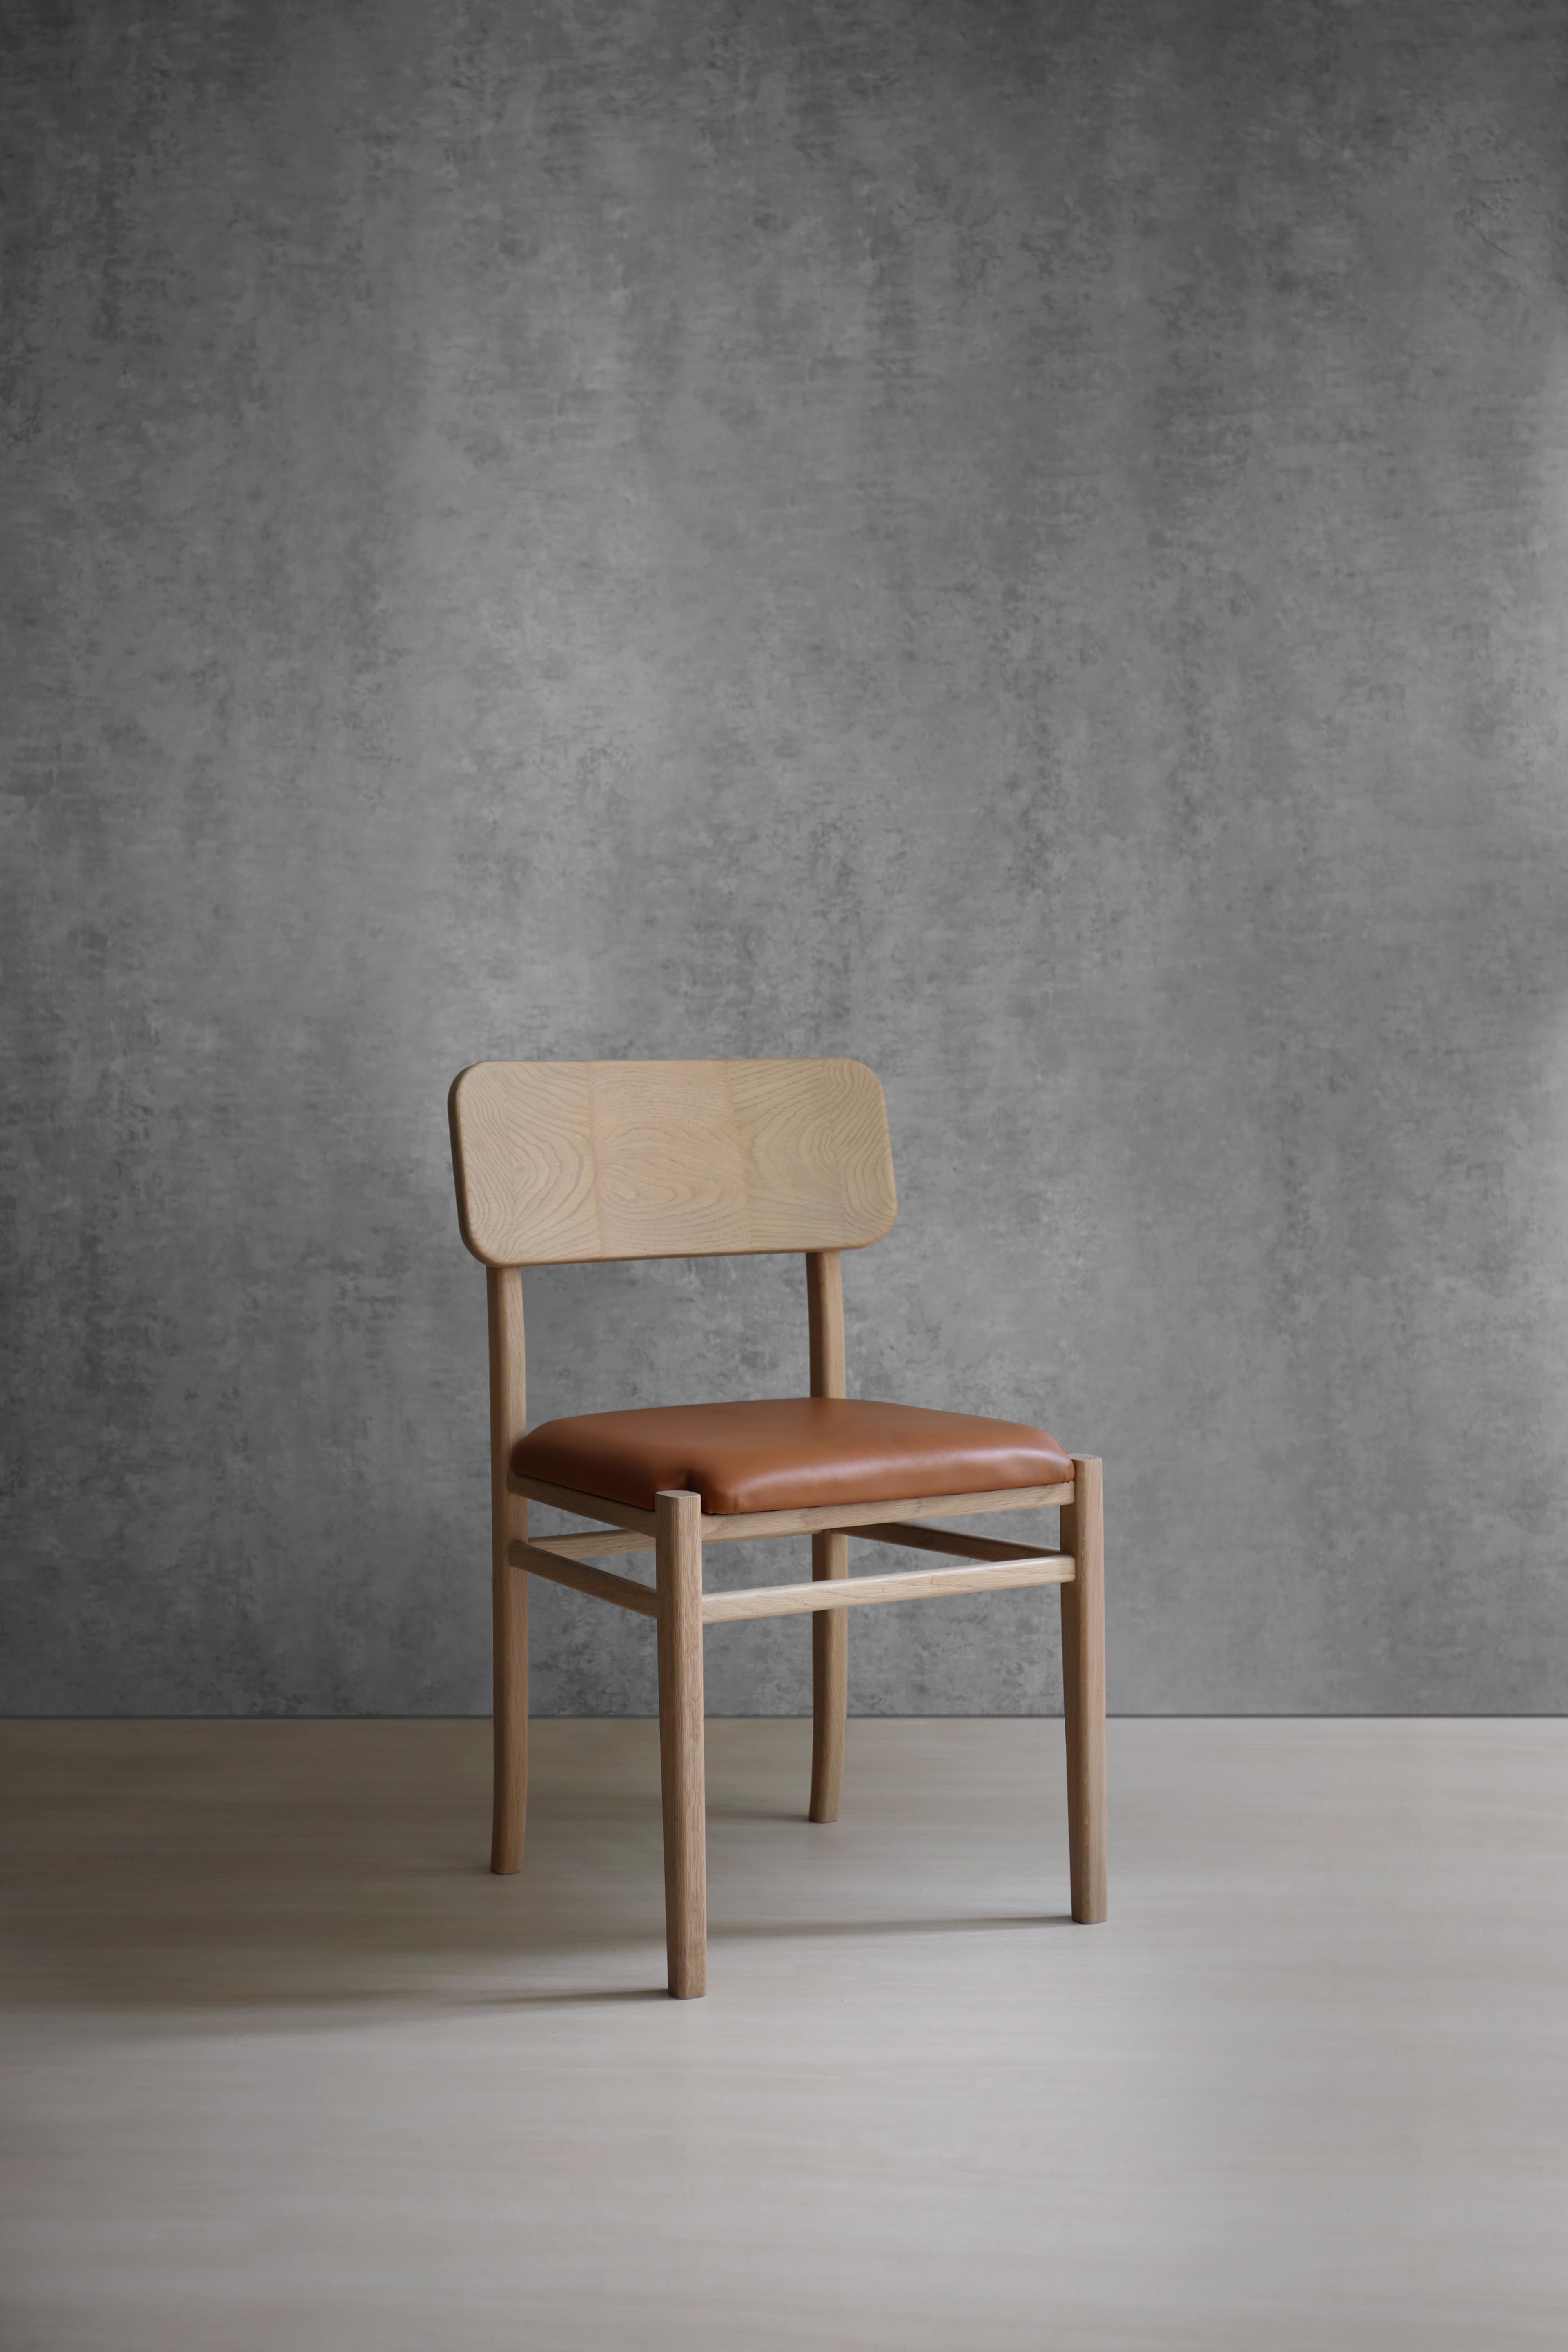 Set of 2 Noviembre X Dining Chair in Oak Wood with Leather Seat by Joel Escalona

The Noviembre collection is inspired by the creative values of Constantin Brancusi, a Romanian sculptor considered one of the most influential artists of the twentieth